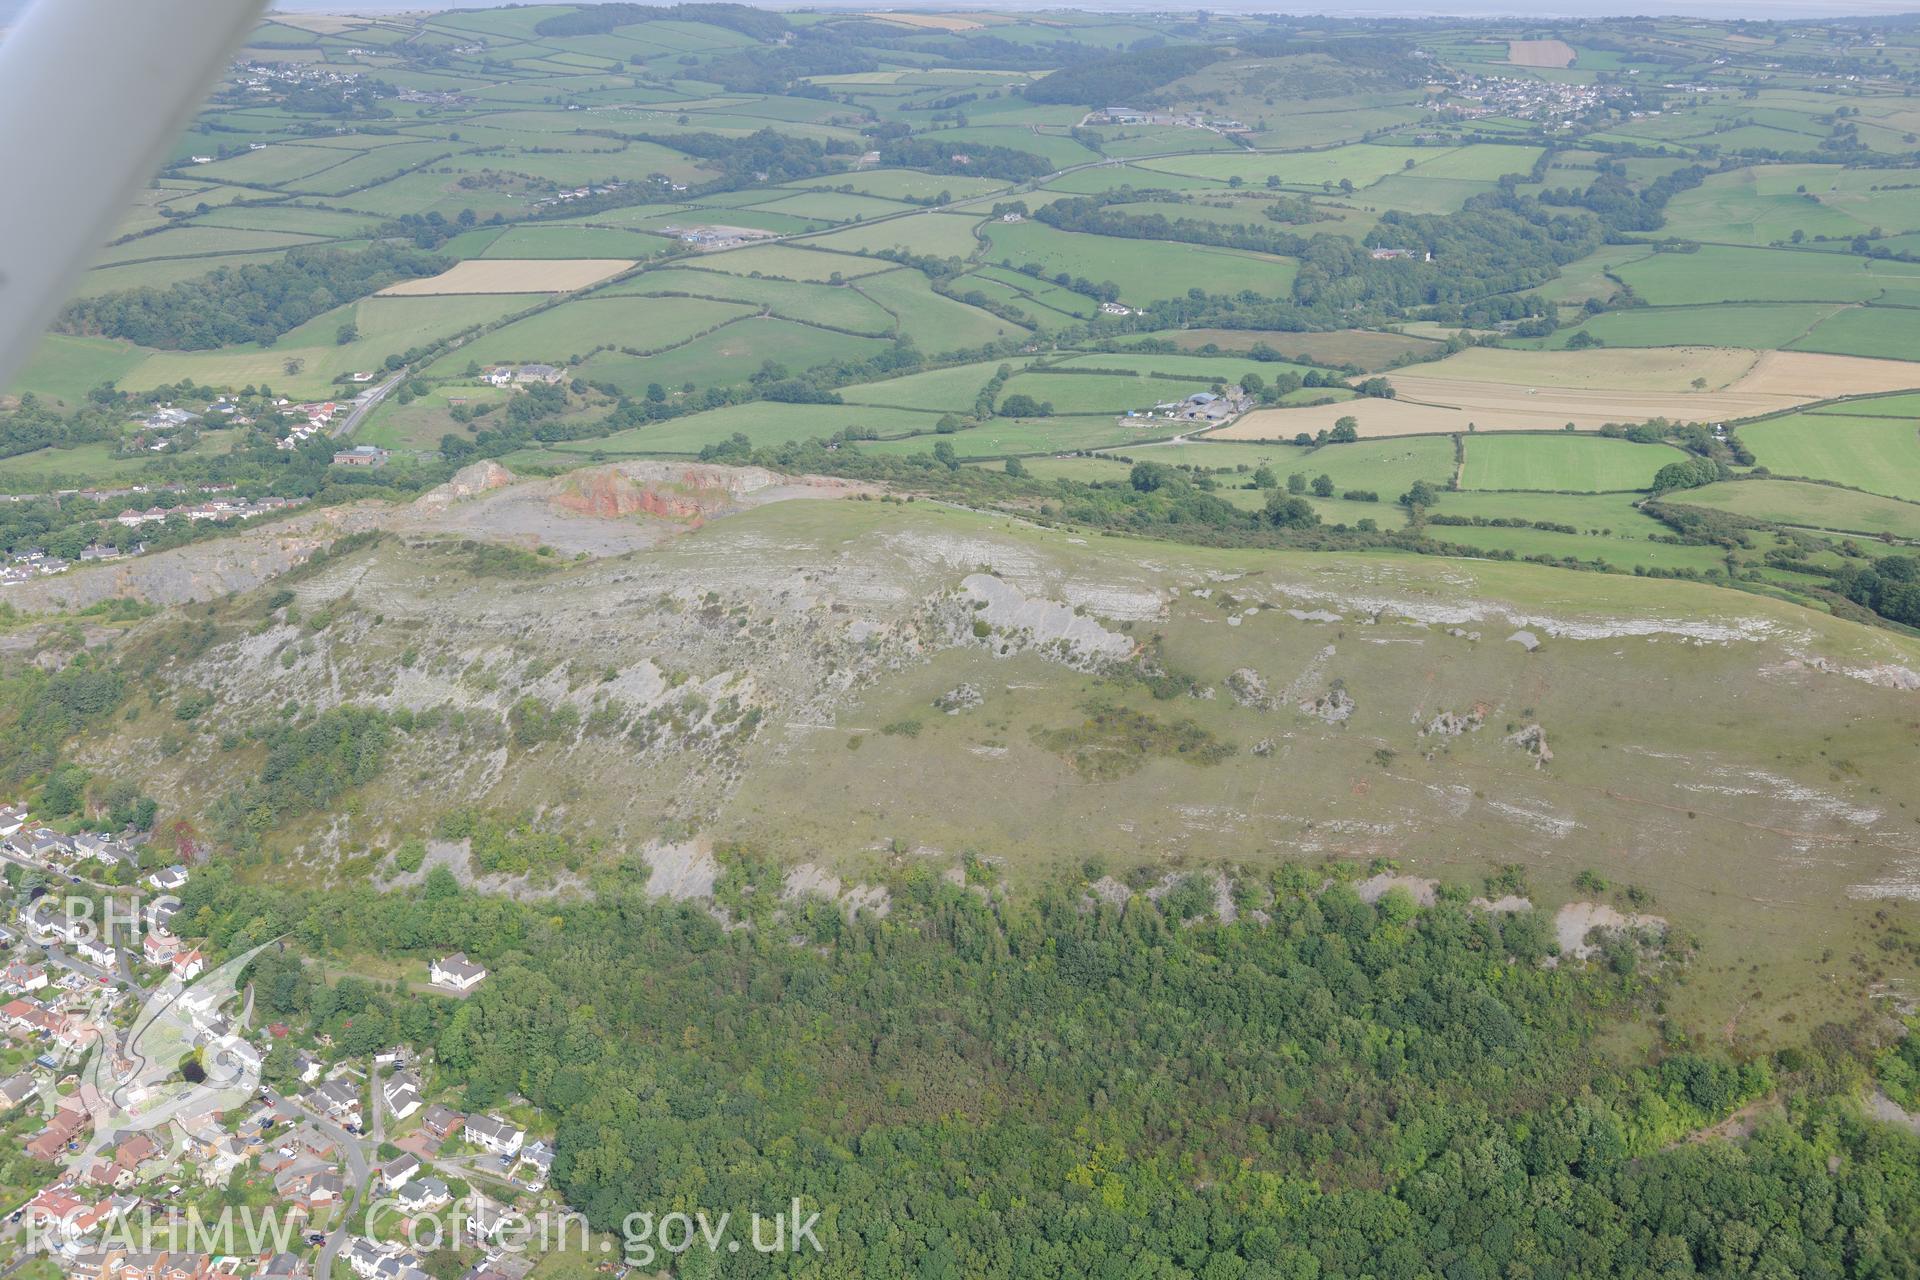 Moel Hiraddug Camp, Dyserth, near St. Asaph. Oblique aerial photograph taken during the Royal Commission's programme of archaeological aerial reconnaissance by Toby Driver on 11th September 2015.